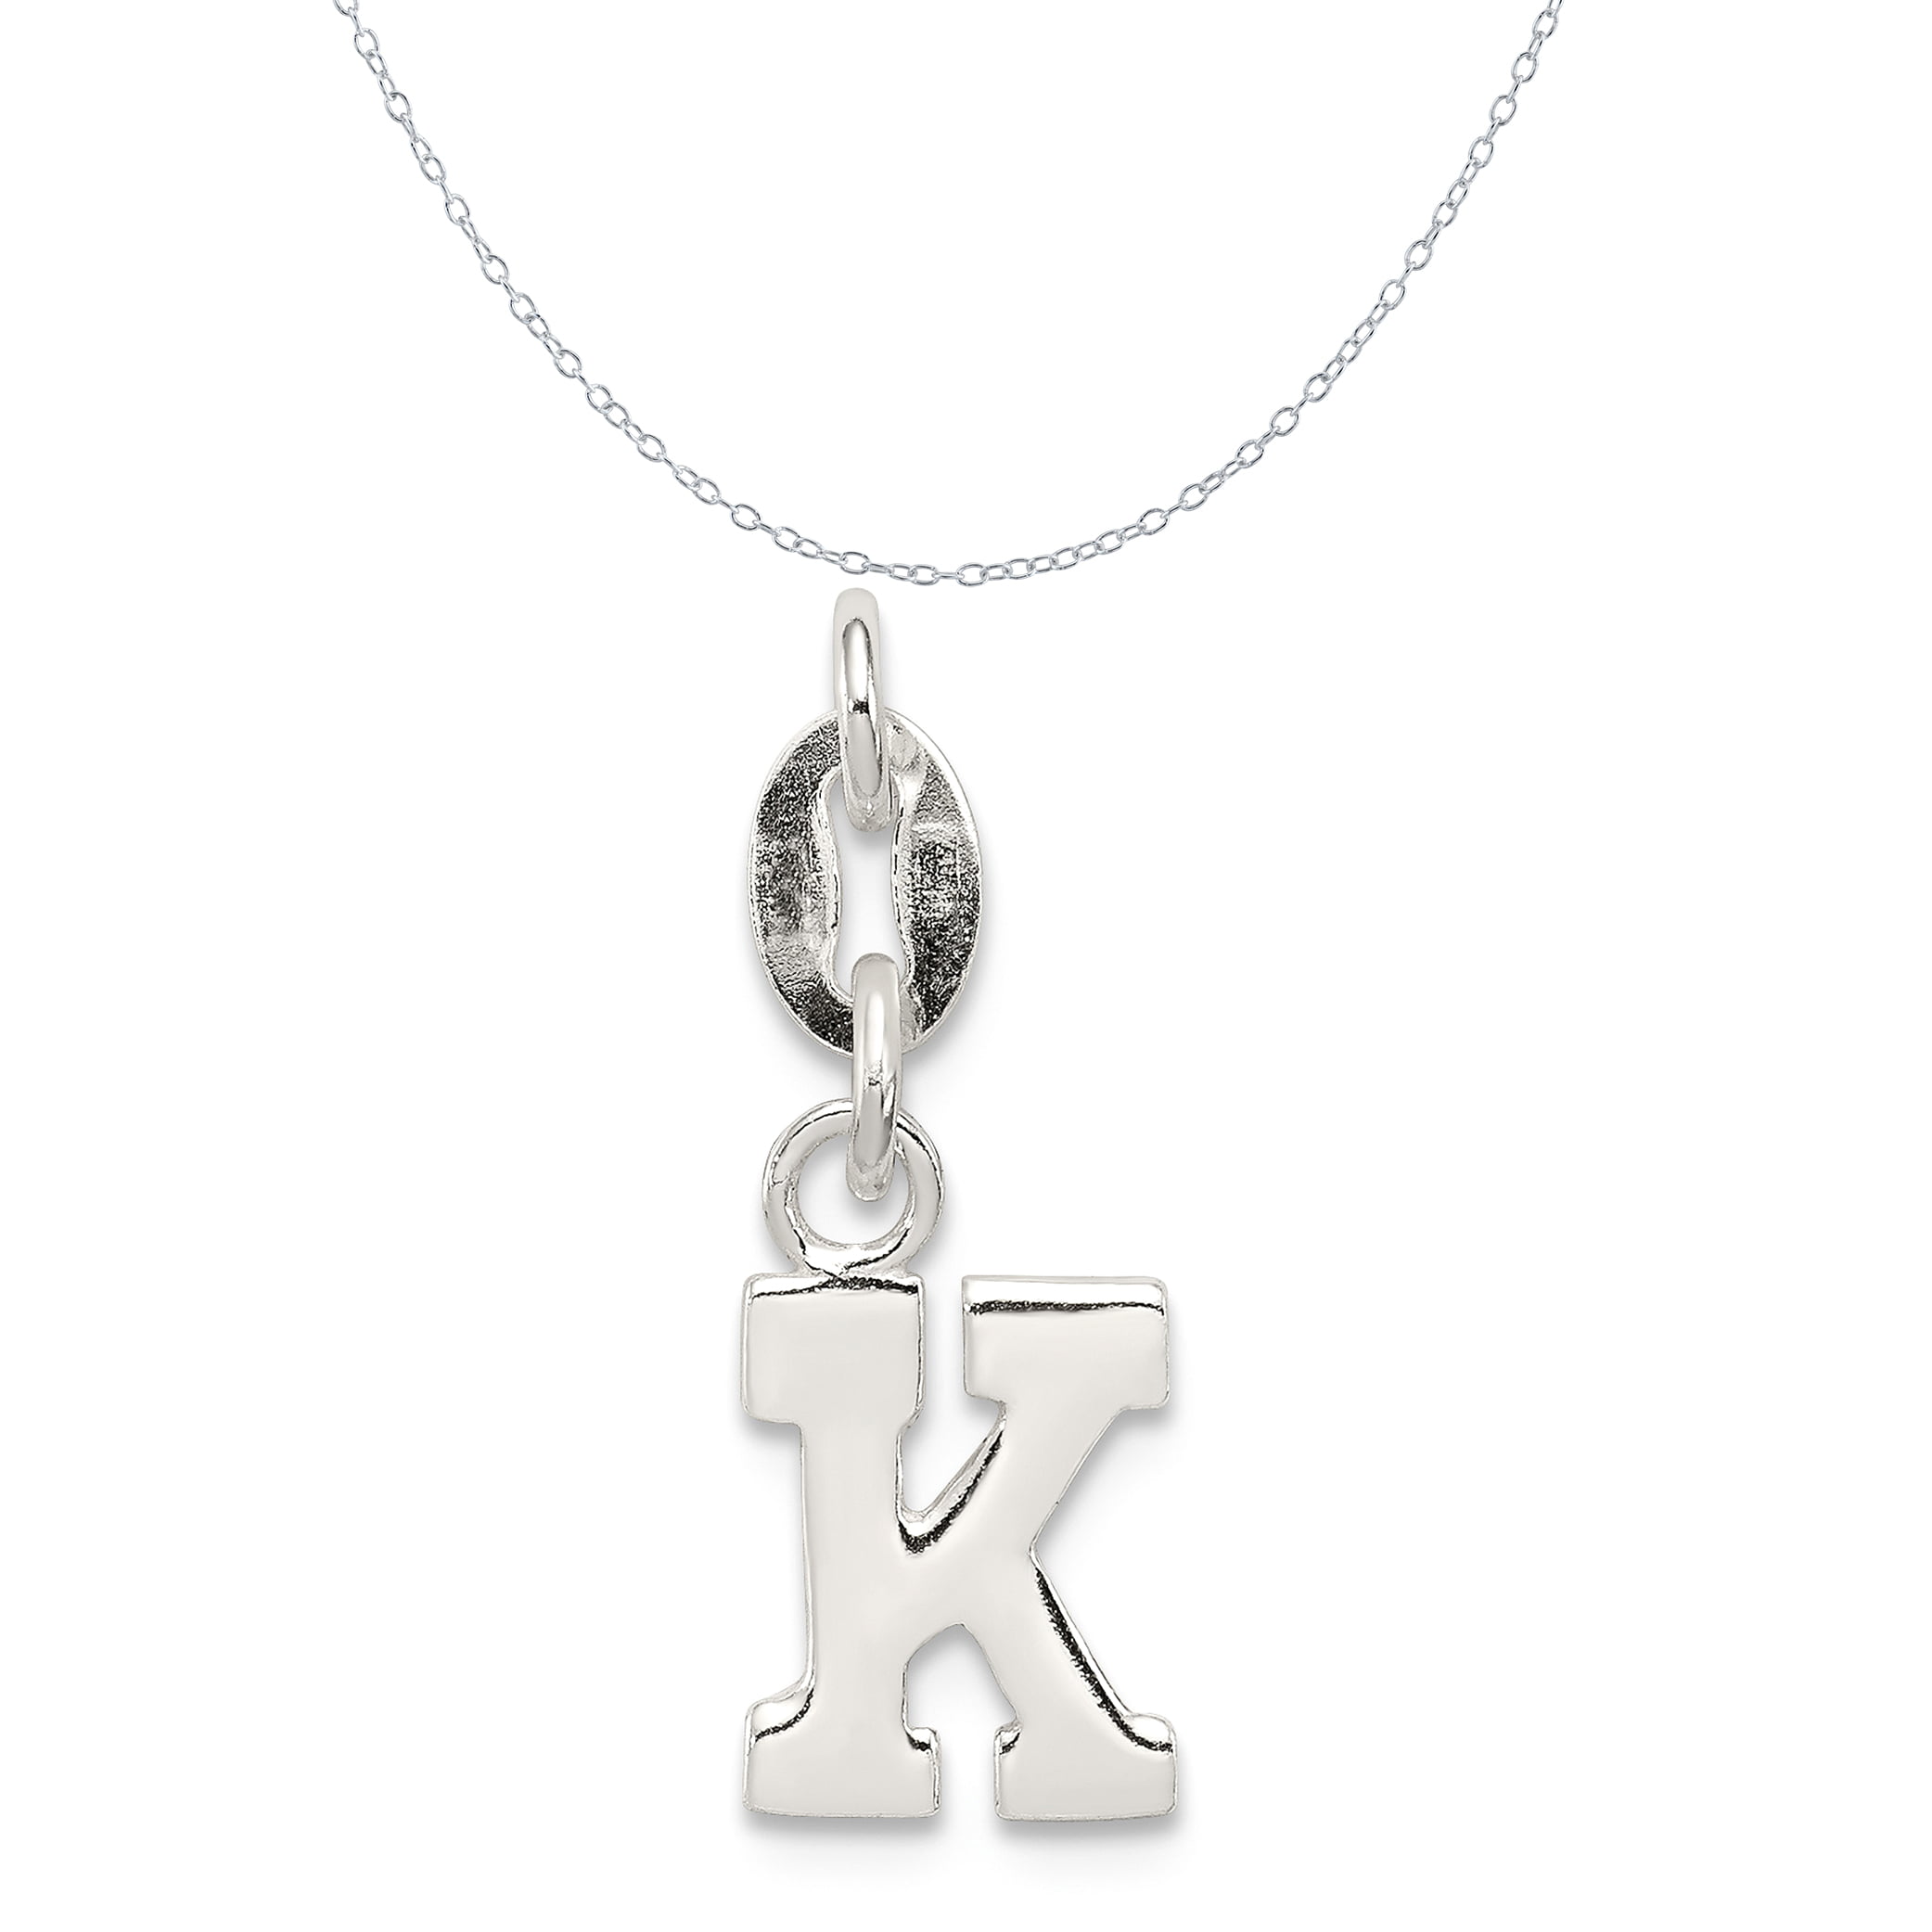 Mireval Sterling Silver Initial R Charm on a Sterling Silver Carded Box Chain Necklace 18 